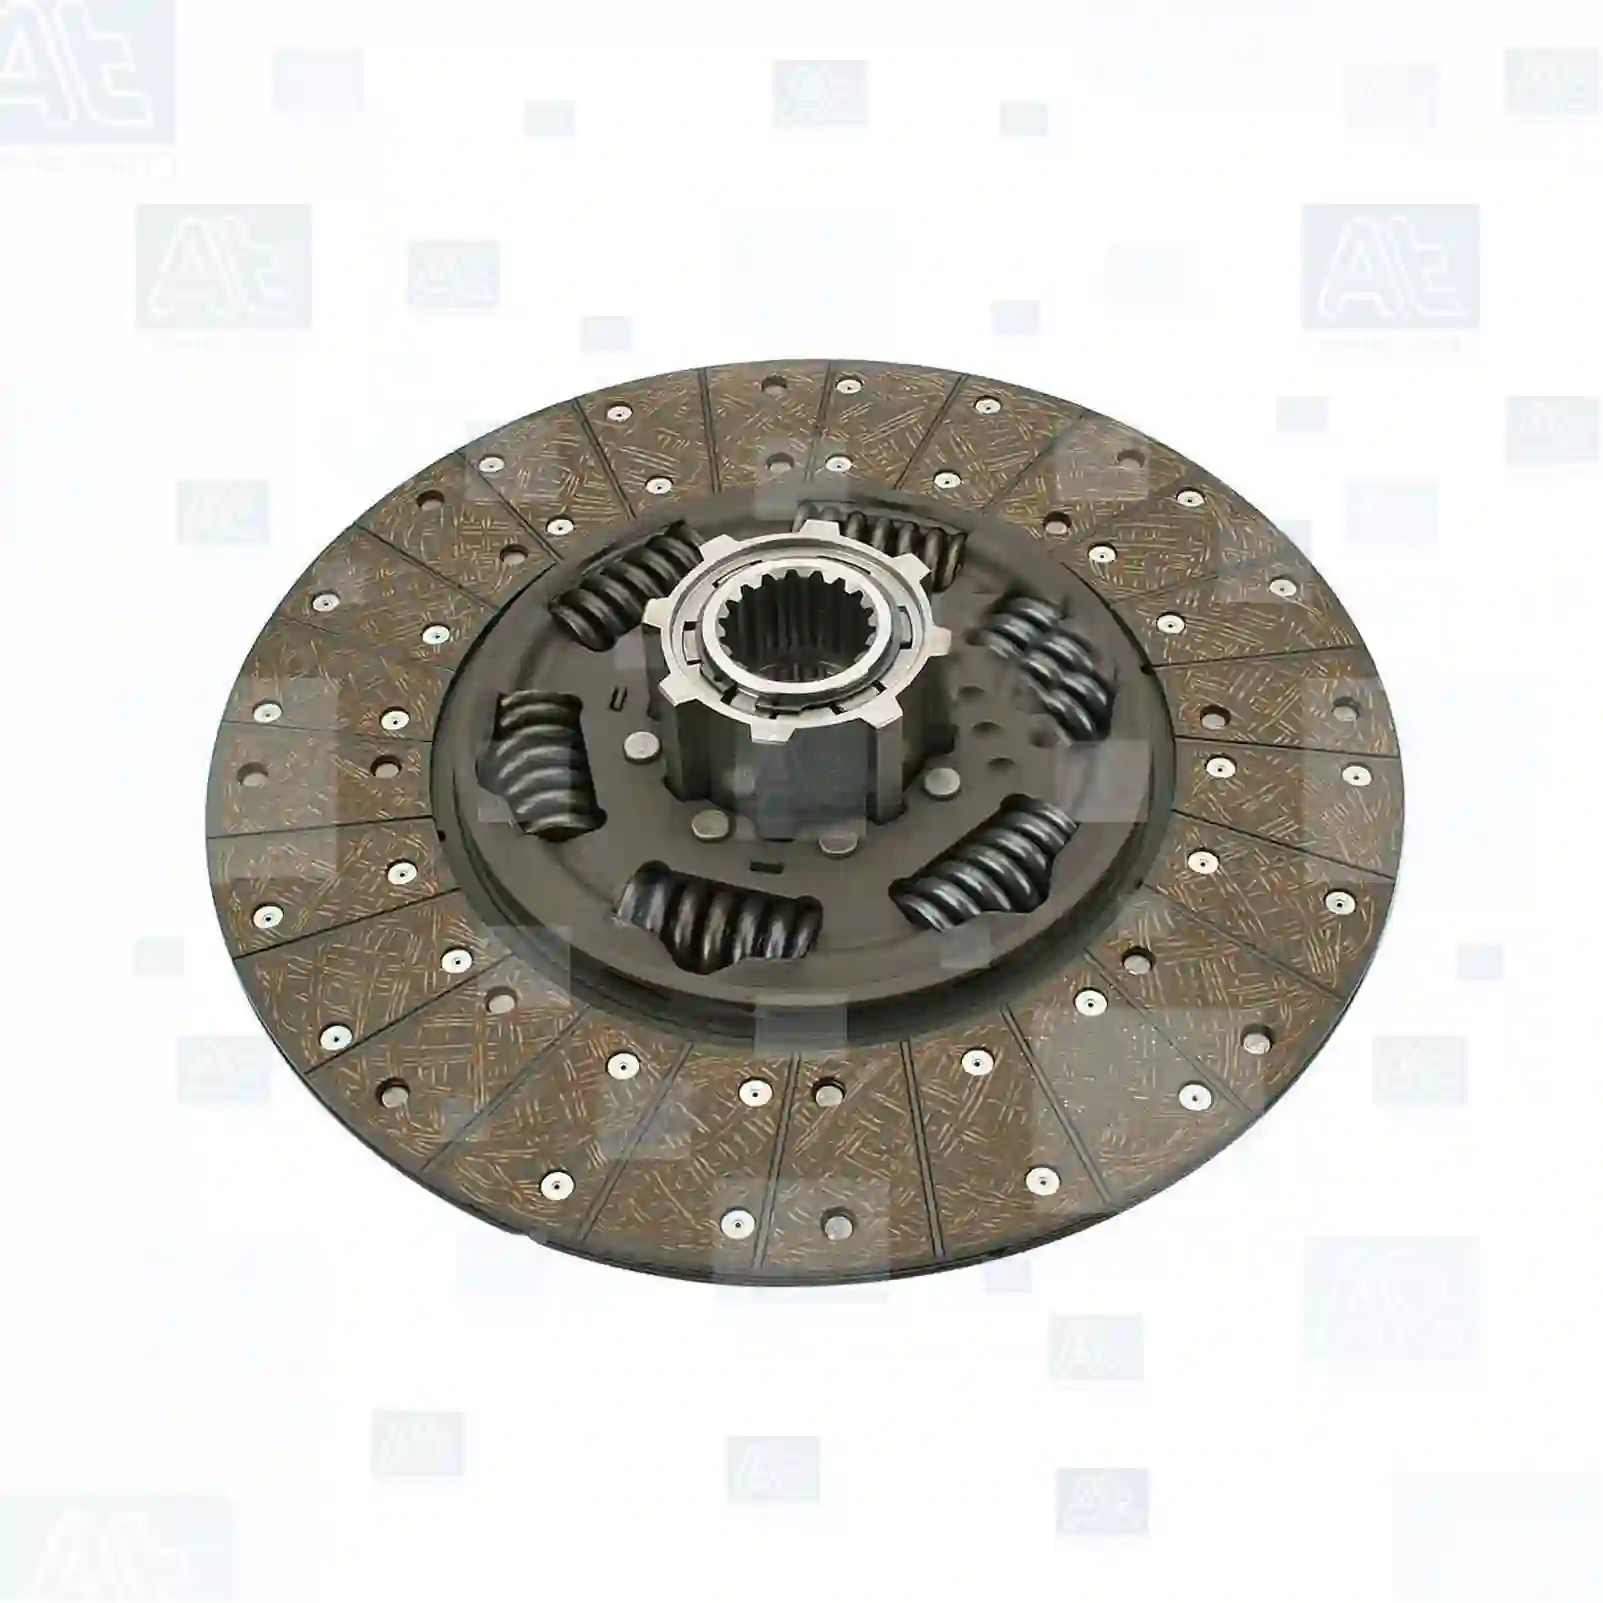 Clutch disc, at no 77722418, oem no: 0152507903, 0152508003, 0152508103, 0162509403, 0162509503, 0162509603, 0172500303, 0172500903, 0172501103, 0172505903, 0172506003, 0172506103, 0182501103, 0182501303, 0182506003, 018250600380, 0192505203, 019250520380, 0192506103, 019250610380, 0202503803, 0202509403, 020250940380, 0212502003, 0212502103, 0212502203, 021250220380, 0212507603, 0212508403, 0212508503, 0212508703, 0212509703, 0222501503, 0242500603, ZG30297-0008 At Spare Part | Engine, Accelerator Pedal, Camshaft, Connecting Rod, Crankcase, Crankshaft, Cylinder Head, Engine Suspension Mountings, Exhaust Manifold, Exhaust Gas Recirculation, Filter Kits, Flywheel Housing, General Overhaul Kits, Engine, Intake Manifold, Oil Cleaner, Oil Cooler, Oil Filter, Oil Pump, Oil Sump, Piston & Liner, Sensor & Switch, Timing Case, Turbocharger, Cooling System, Belt Tensioner, Coolant Filter, Coolant Pipe, Corrosion Prevention Agent, Drive, Expansion Tank, Fan, Intercooler, Monitors & Gauges, Radiator, Thermostat, V-Belt / Timing belt, Water Pump, Fuel System, Electronical Injector Unit, Feed Pump, Fuel Filter, cpl., Fuel Gauge Sender,  Fuel Line, Fuel Pump, Fuel Tank, Injection Line Kit, Injection Pump, Exhaust System, Clutch & Pedal, Gearbox, Propeller Shaft, Axles, Brake System, Hubs & Wheels, Suspension, Leaf Spring, Universal Parts / Accessories, Steering, Electrical System, Cabin Clutch disc, at no 77722418, oem no: 0152507903, 0152508003, 0152508103, 0162509403, 0162509503, 0162509603, 0172500303, 0172500903, 0172501103, 0172505903, 0172506003, 0172506103, 0182501103, 0182501303, 0182506003, 018250600380, 0192505203, 019250520380, 0192506103, 019250610380, 0202503803, 0202509403, 020250940380, 0212502003, 0212502103, 0212502203, 021250220380, 0212507603, 0212508403, 0212508503, 0212508703, 0212509703, 0222501503, 0242500603, ZG30297-0008 At Spare Part | Engine, Accelerator Pedal, Camshaft, Connecting Rod, Crankcase, Crankshaft, Cylinder Head, Engine Suspension Mountings, Exhaust Manifold, Exhaust Gas Recirculation, Filter Kits, Flywheel Housing, General Overhaul Kits, Engine, Intake Manifold, Oil Cleaner, Oil Cooler, Oil Filter, Oil Pump, Oil Sump, Piston & Liner, Sensor & Switch, Timing Case, Turbocharger, Cooling System, Belt Tensioner, Coolant Filter, Coolant Pipe, Corrosion Prevention Agent, Drive, Expansion Tank, Fan, Intercooler, Monitors & Gauges, Radiator, Thermostat, V-Belt / Timing belt, Water Pump, Fuel System, Electronical Injector Unit, Feed Pump, Fuel Filter, cpl., Fuel Gauge Sender,  Fuel Line, Fuel Pump, Fuel Tank, Injection Line Kit, Injection Pump, Exhaust System, Clutch & Pedal, Gearbox, Propeller Shaft, Axles, Brake System, Hubs & Wheels, Suspension, Leaf Spring, Universal Parts / Accessories, Steering, Electrical System, Cabin